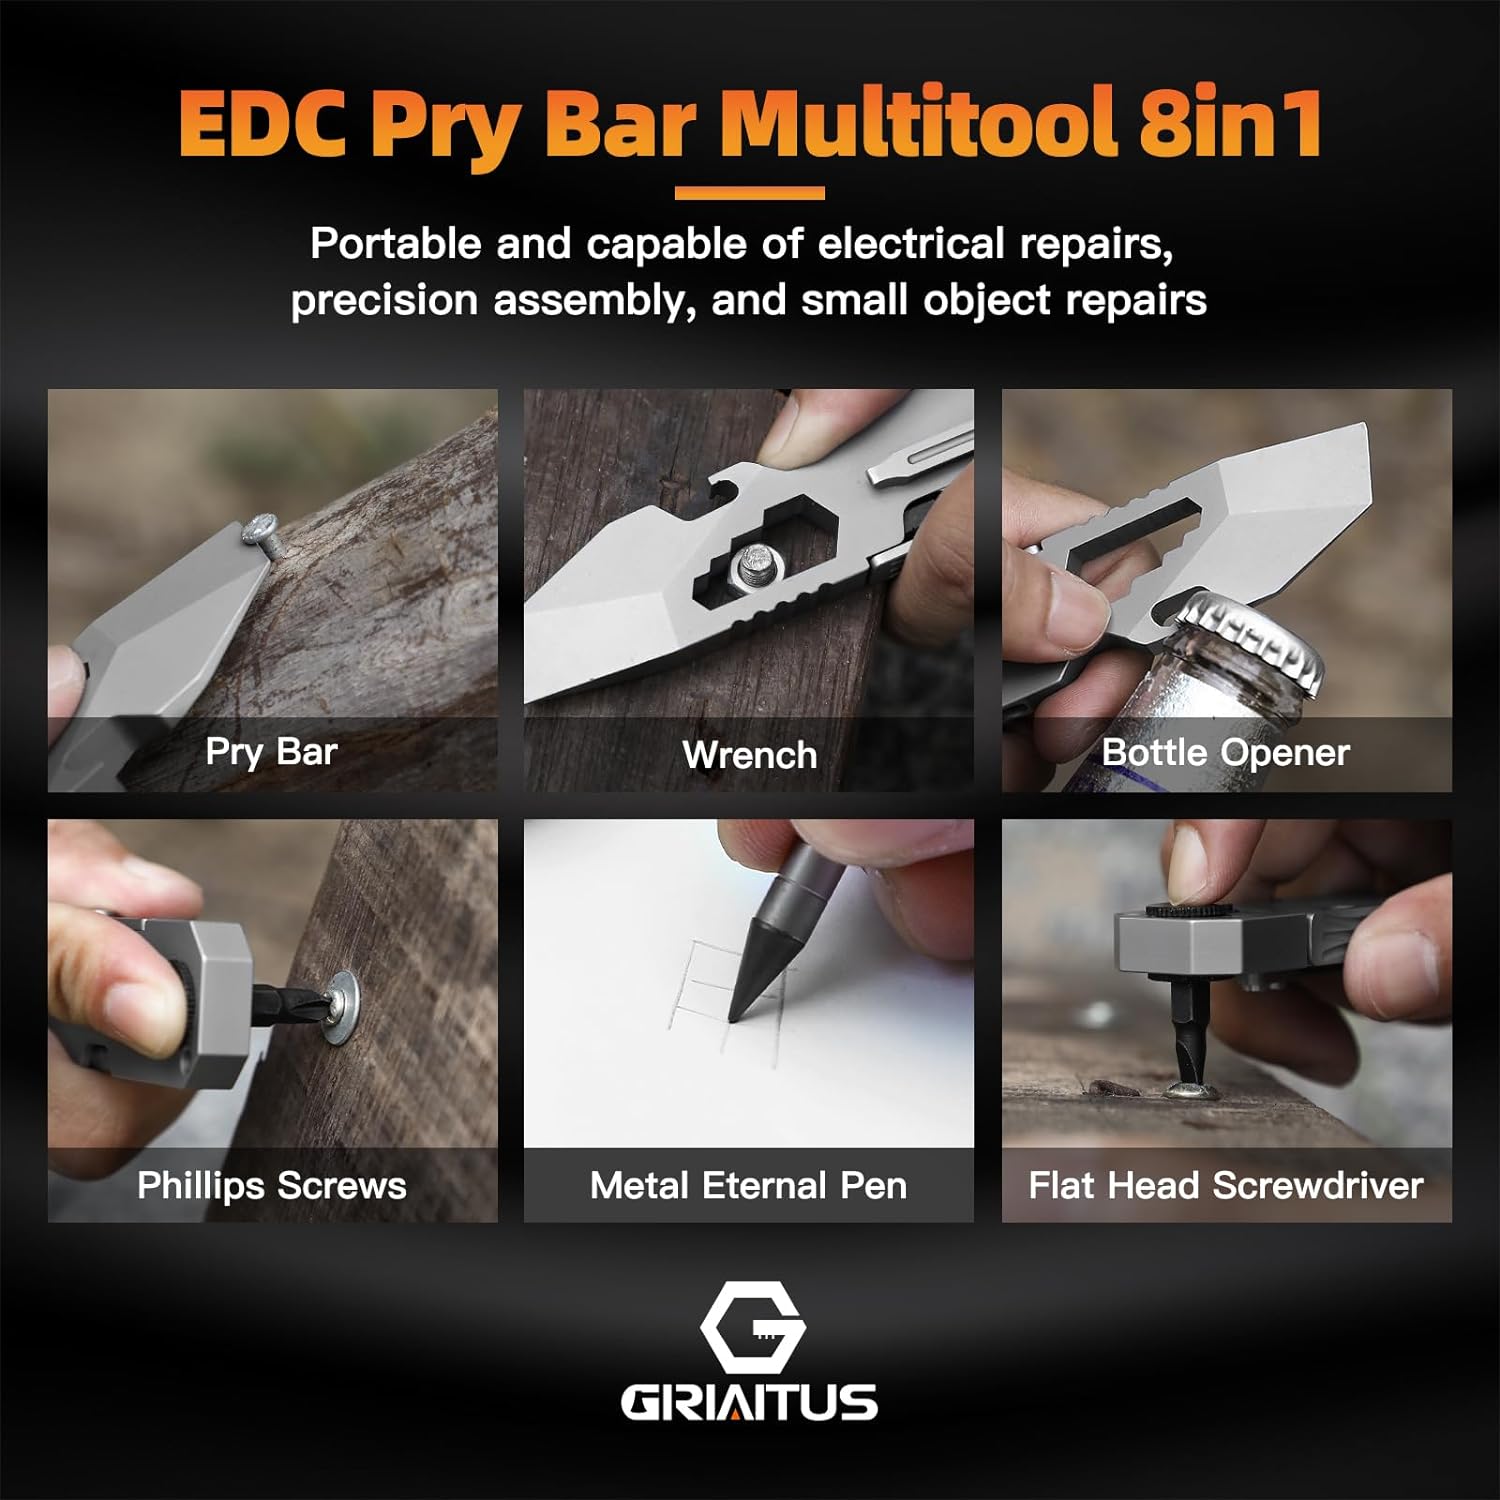 EDC Pry Bar Multitool with Bi-Directional Ratchet Screwdriver & Everlasting Pen, Wrenches, Crowbar, Bottle and Box Openers - Your Versatile Companion for Everyday Carry and Camping Accessories